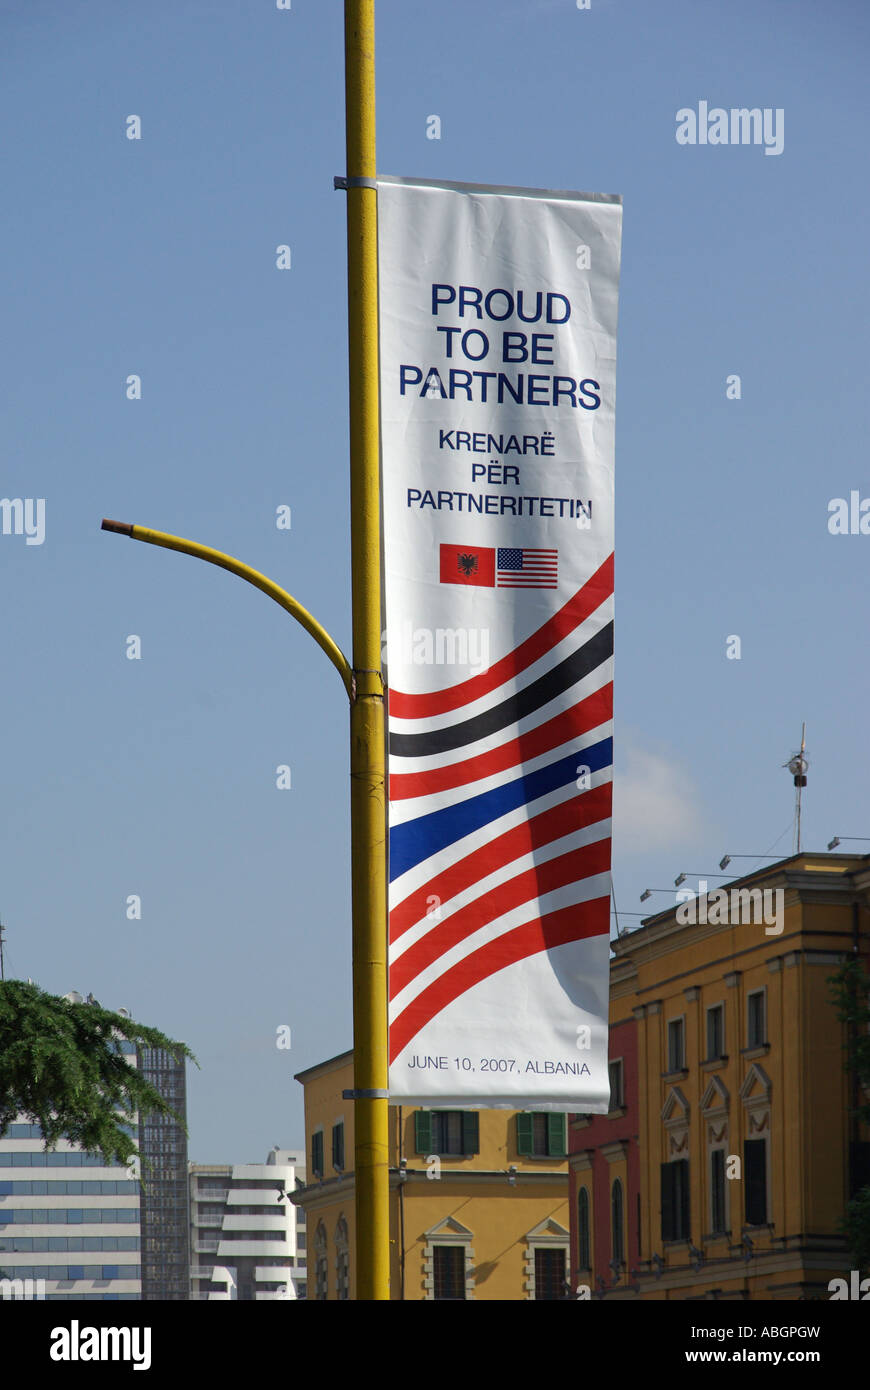 Official  banner Proud to be Partners widely displayed in Tirana promoting visit of USA President George W Bush in June 2007 to Republic of Albania Stock Photo